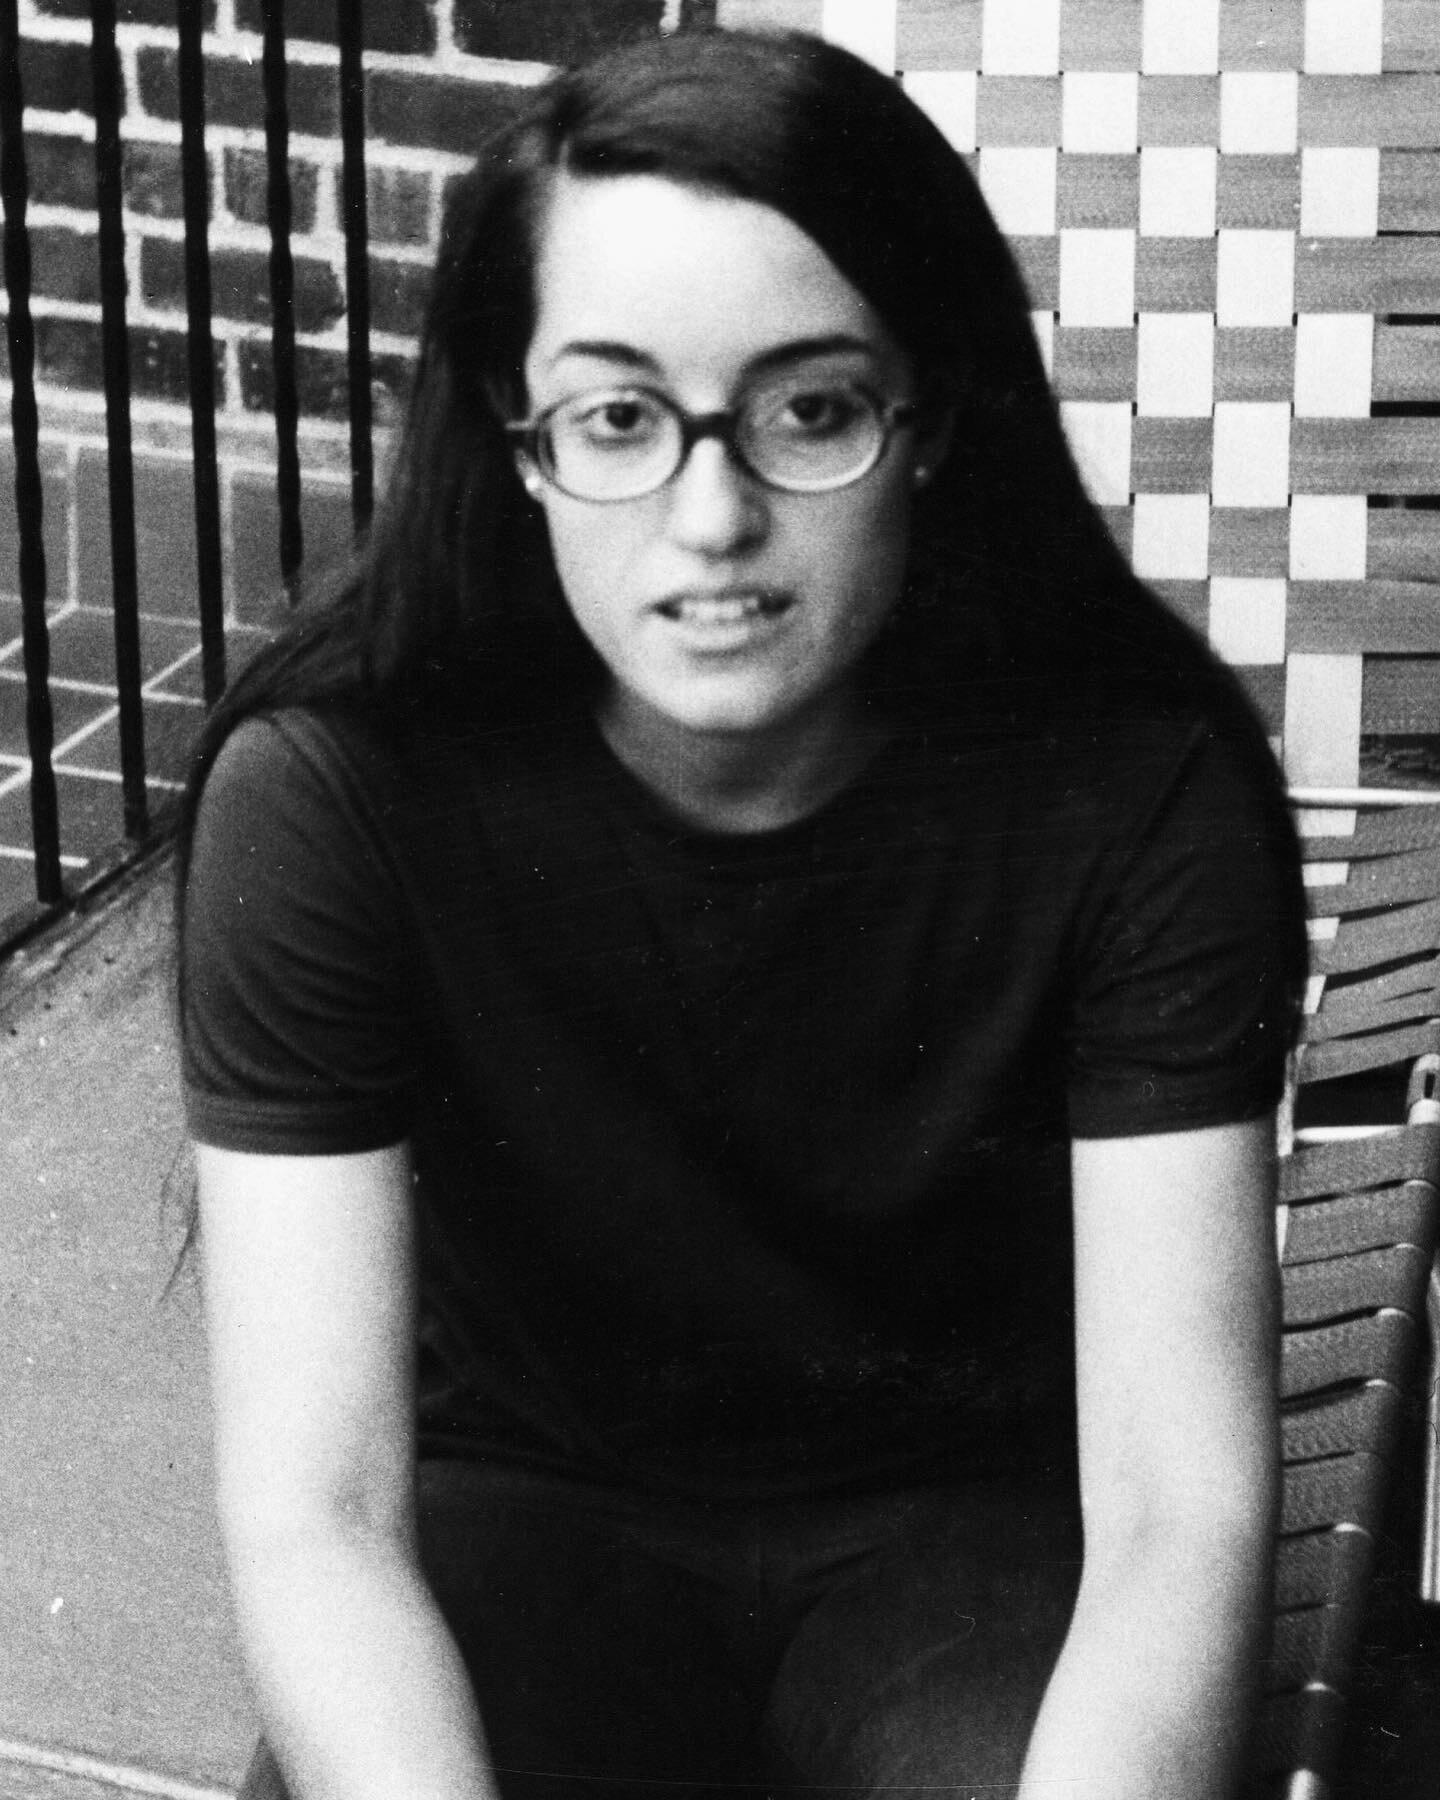 A photo of my Mom sitting on the front stoop of her family&rsquo;s house on Waring Avenue in The Bronx. The photo was taken in August of 1969, the day that she and some friends were about to depart for Woodstock, aka &ldquo;An Aquarian Exposition: 3 